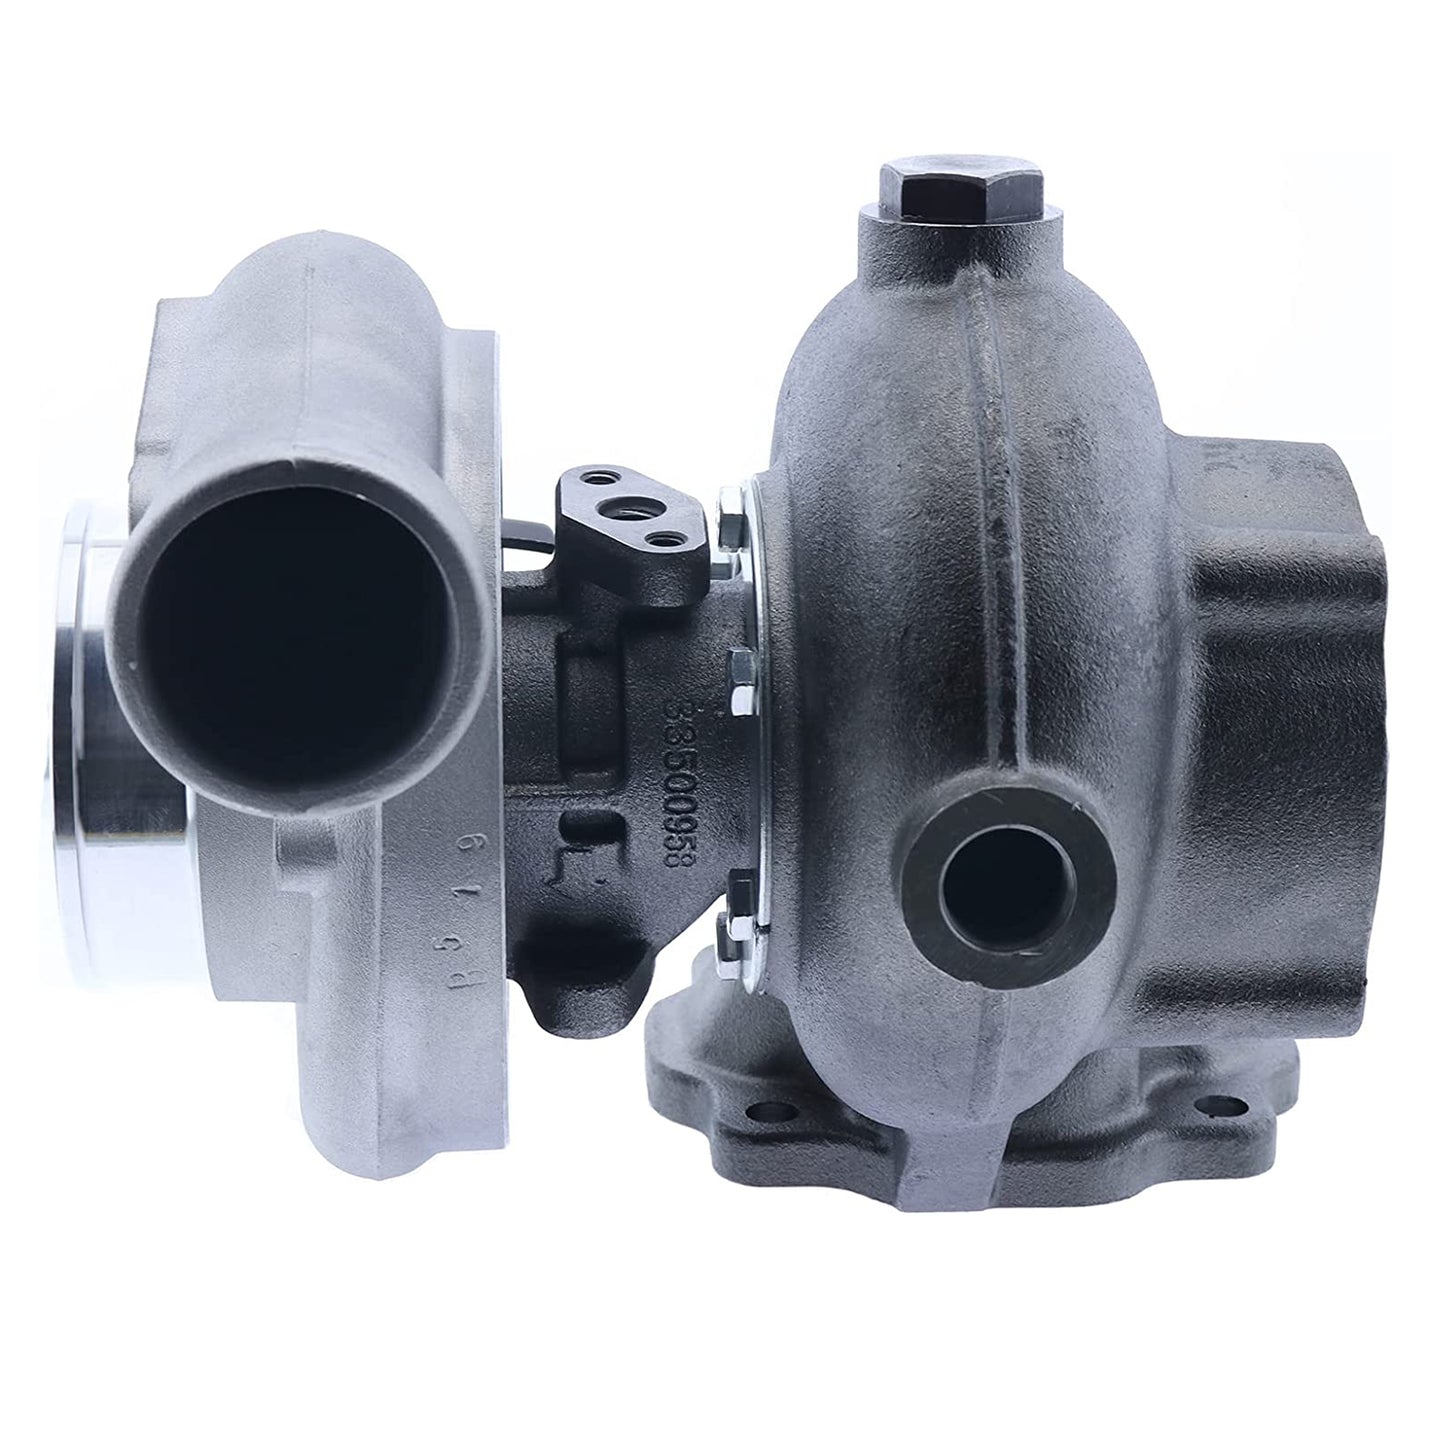 3536620,3536621 Turbocharger Compatible With 1995-06 CUMS Marine with 6BTAM Engine